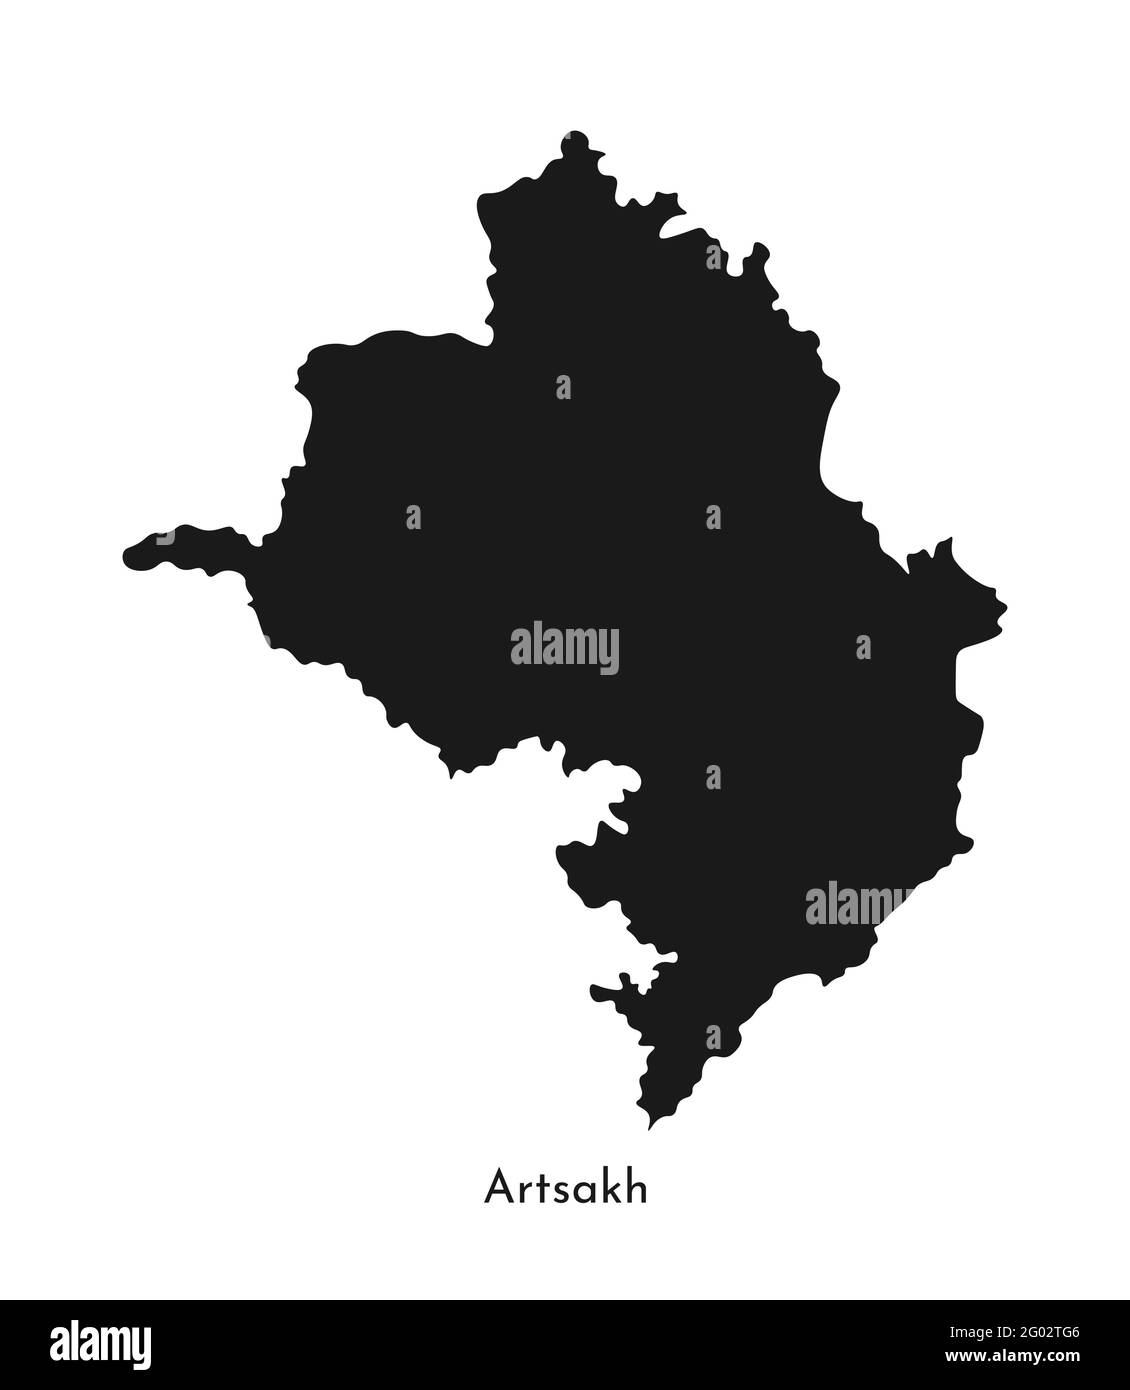 Vector isolated simplified illustration icon with black silhouette of Artsakh (Nagorno-Karabakh Republic) map. White background. Stock Vector